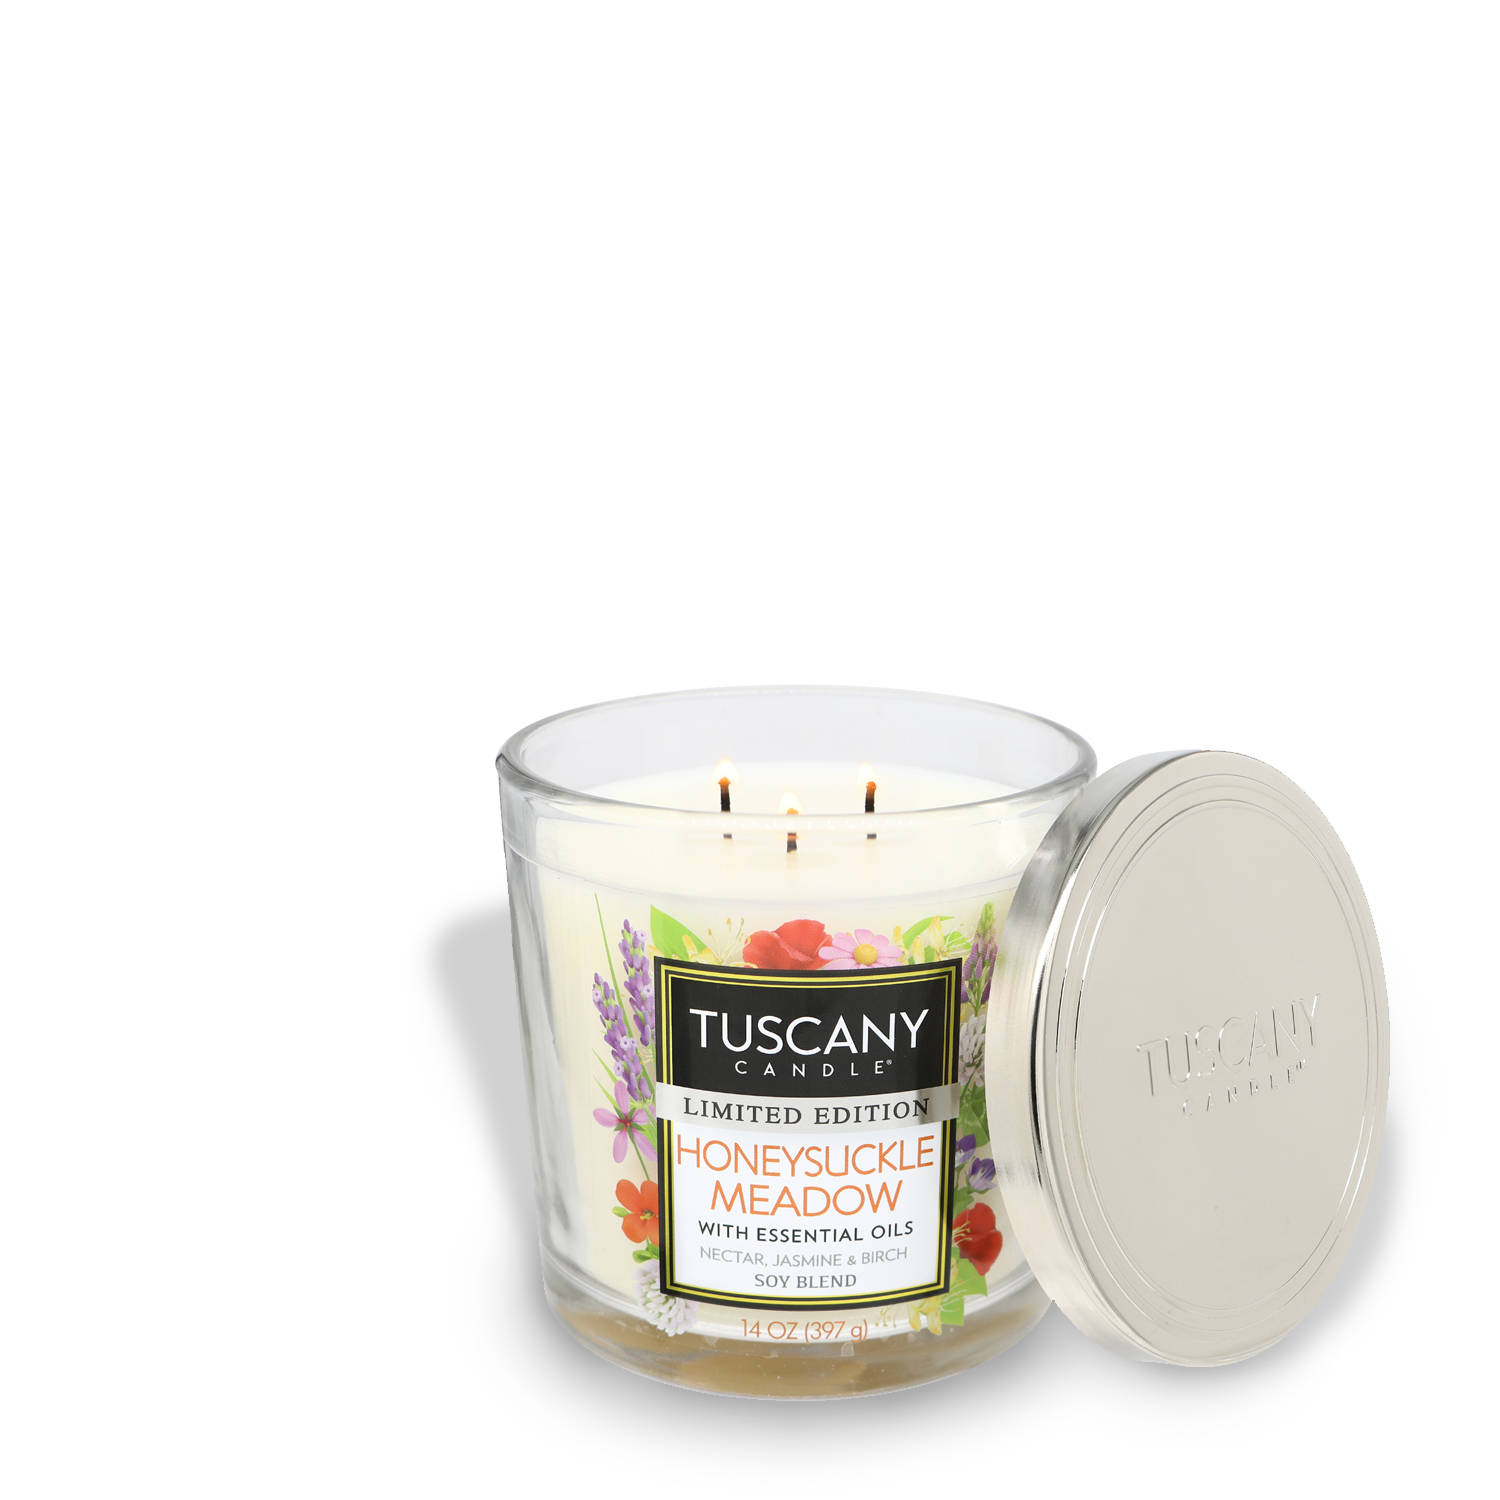 A three-wick Honeysuckle Meadow scented candle in a glass jar with a metallic lid off to the side, labeled "Tuscany Limited Edition Cherry Blossom Meadow with Essential Oils.